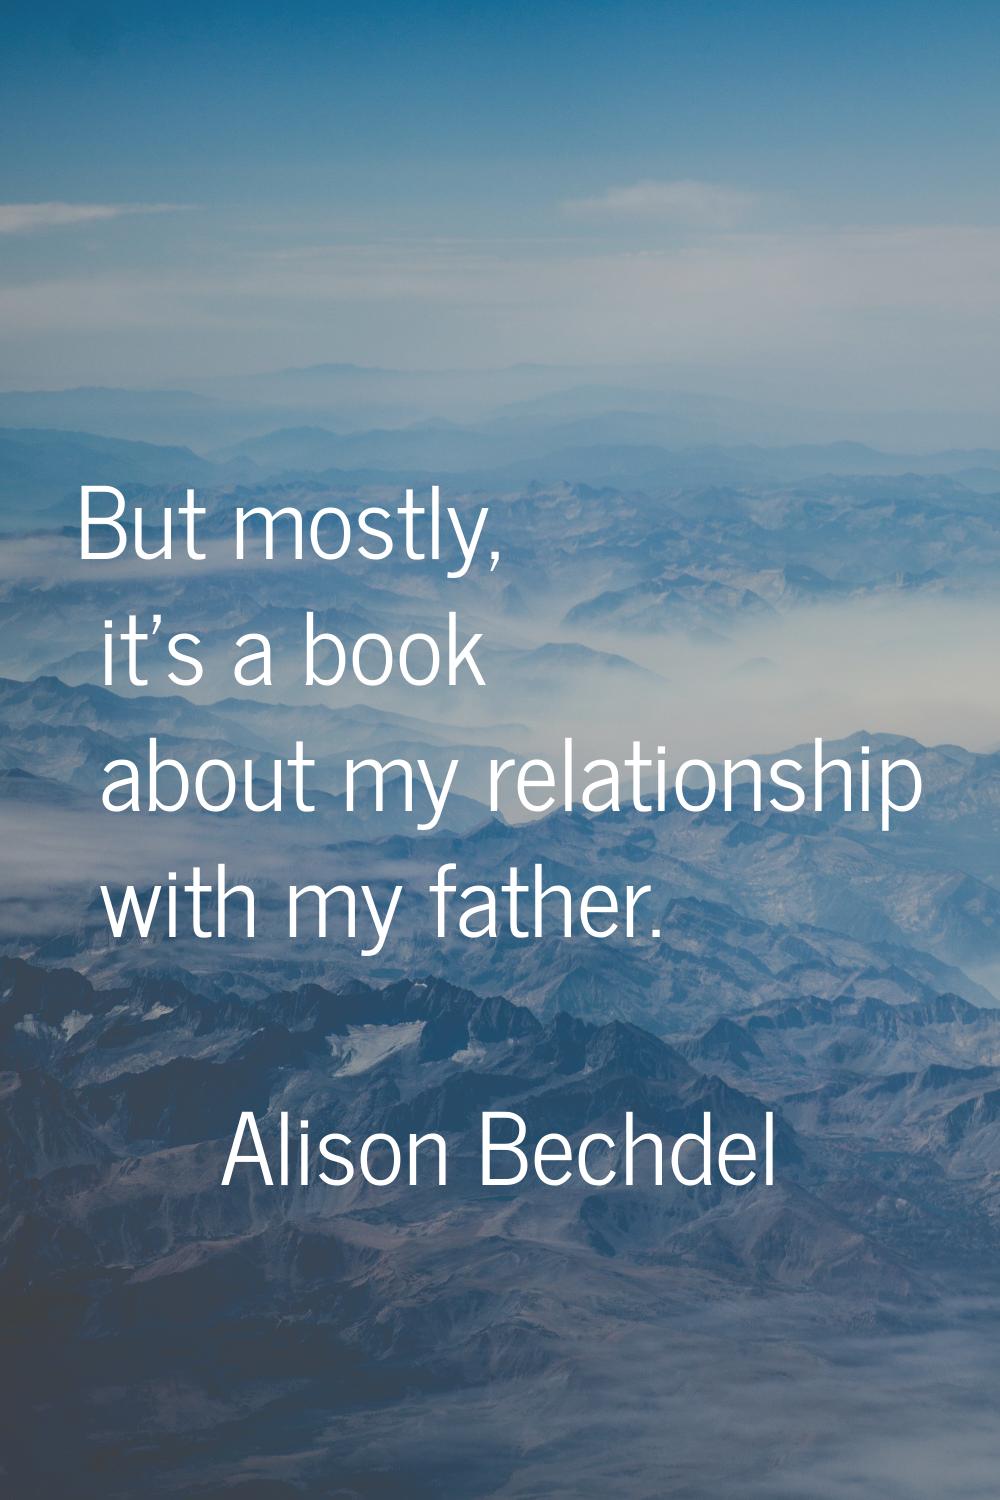 But mostly, it's a book about my relationship with my father.